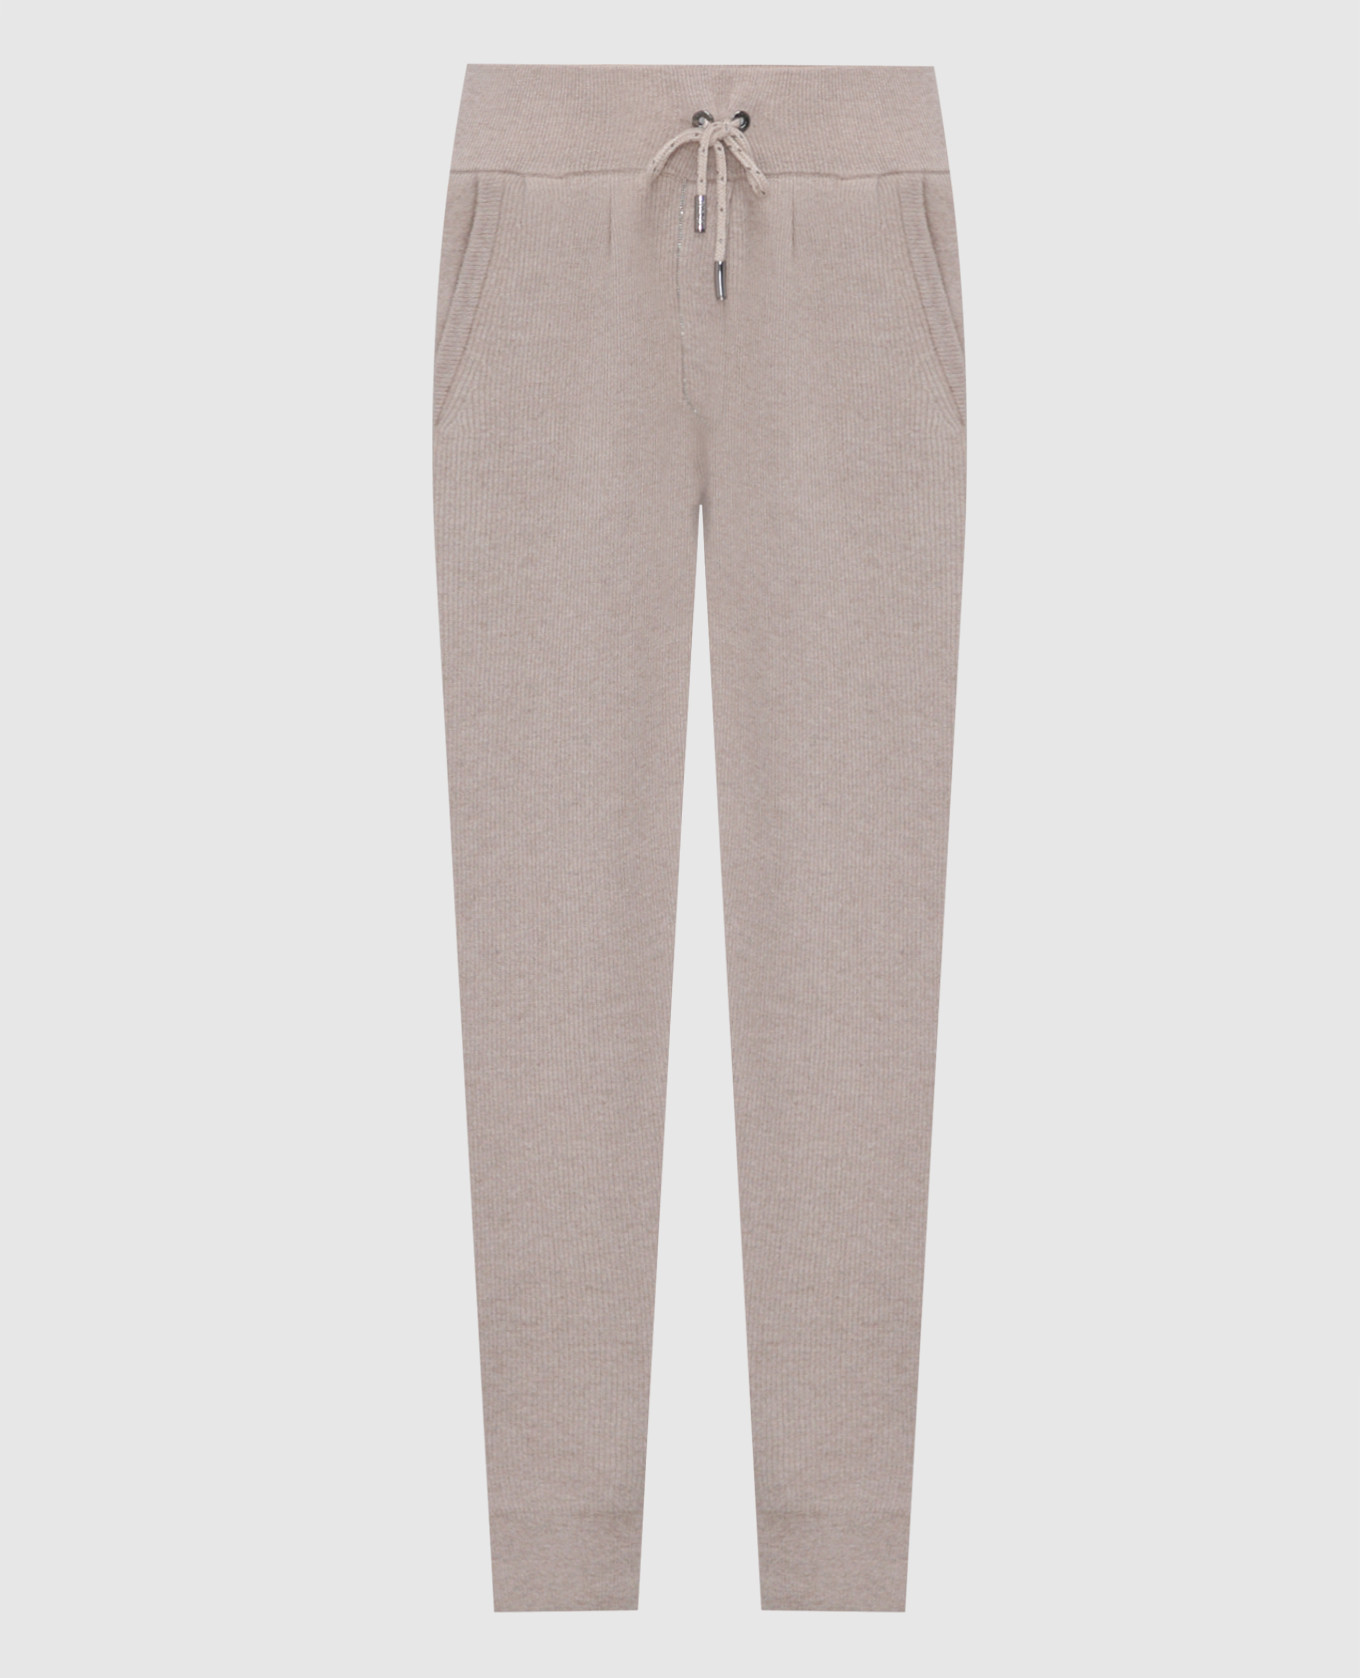 Beige wool and cashmere joggers with monil chain